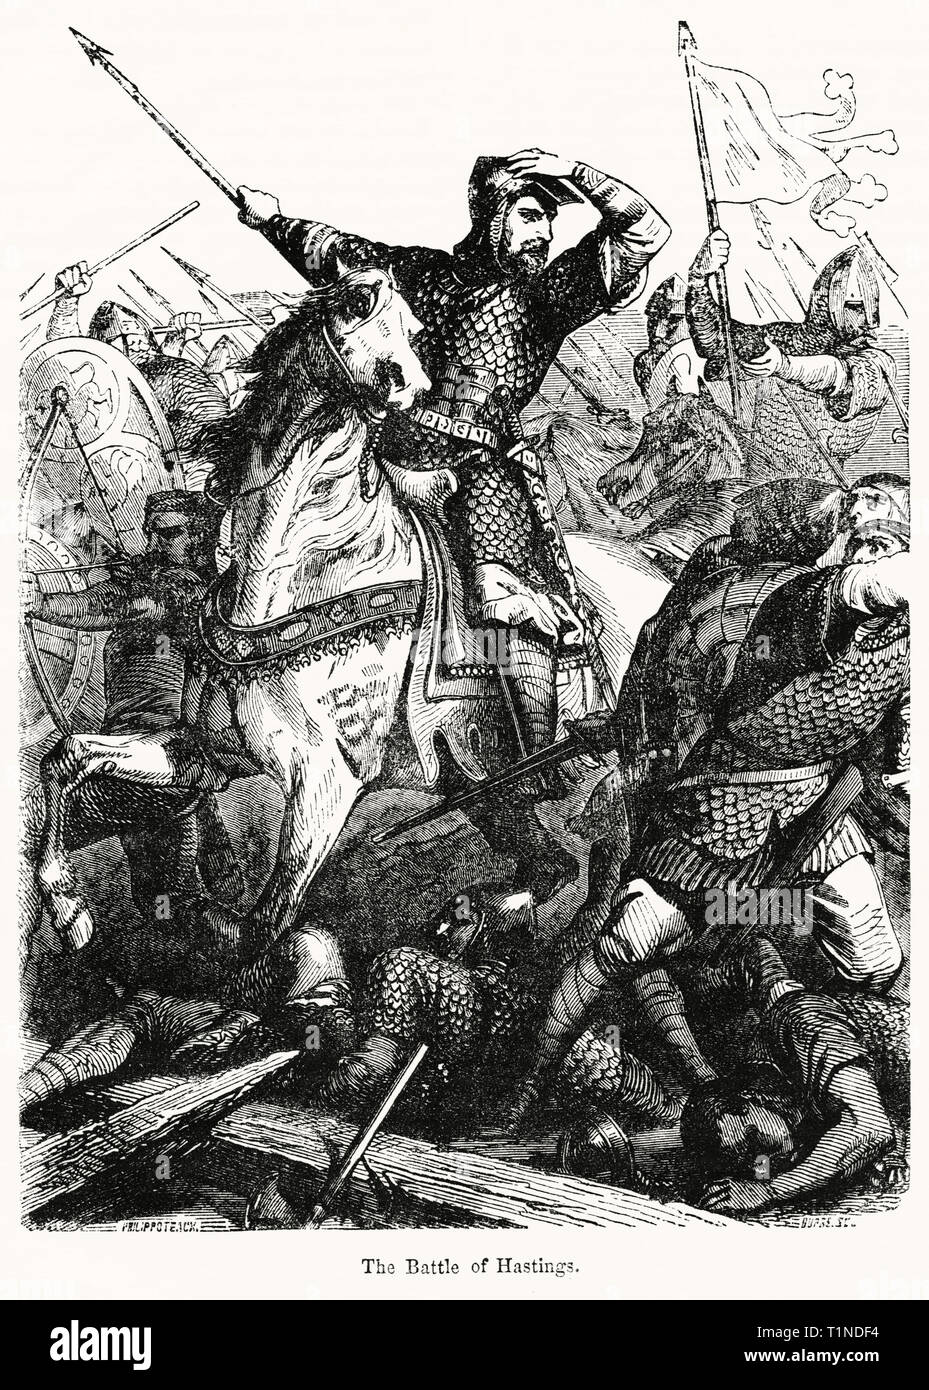 The Battle of Hastings, Illustration from John Cassell's Illustrated History of England, Vol. I from the earliest period to the reign of Edward the Fourth, Cassell, Petter and Galpin, 1857 Stock Photo